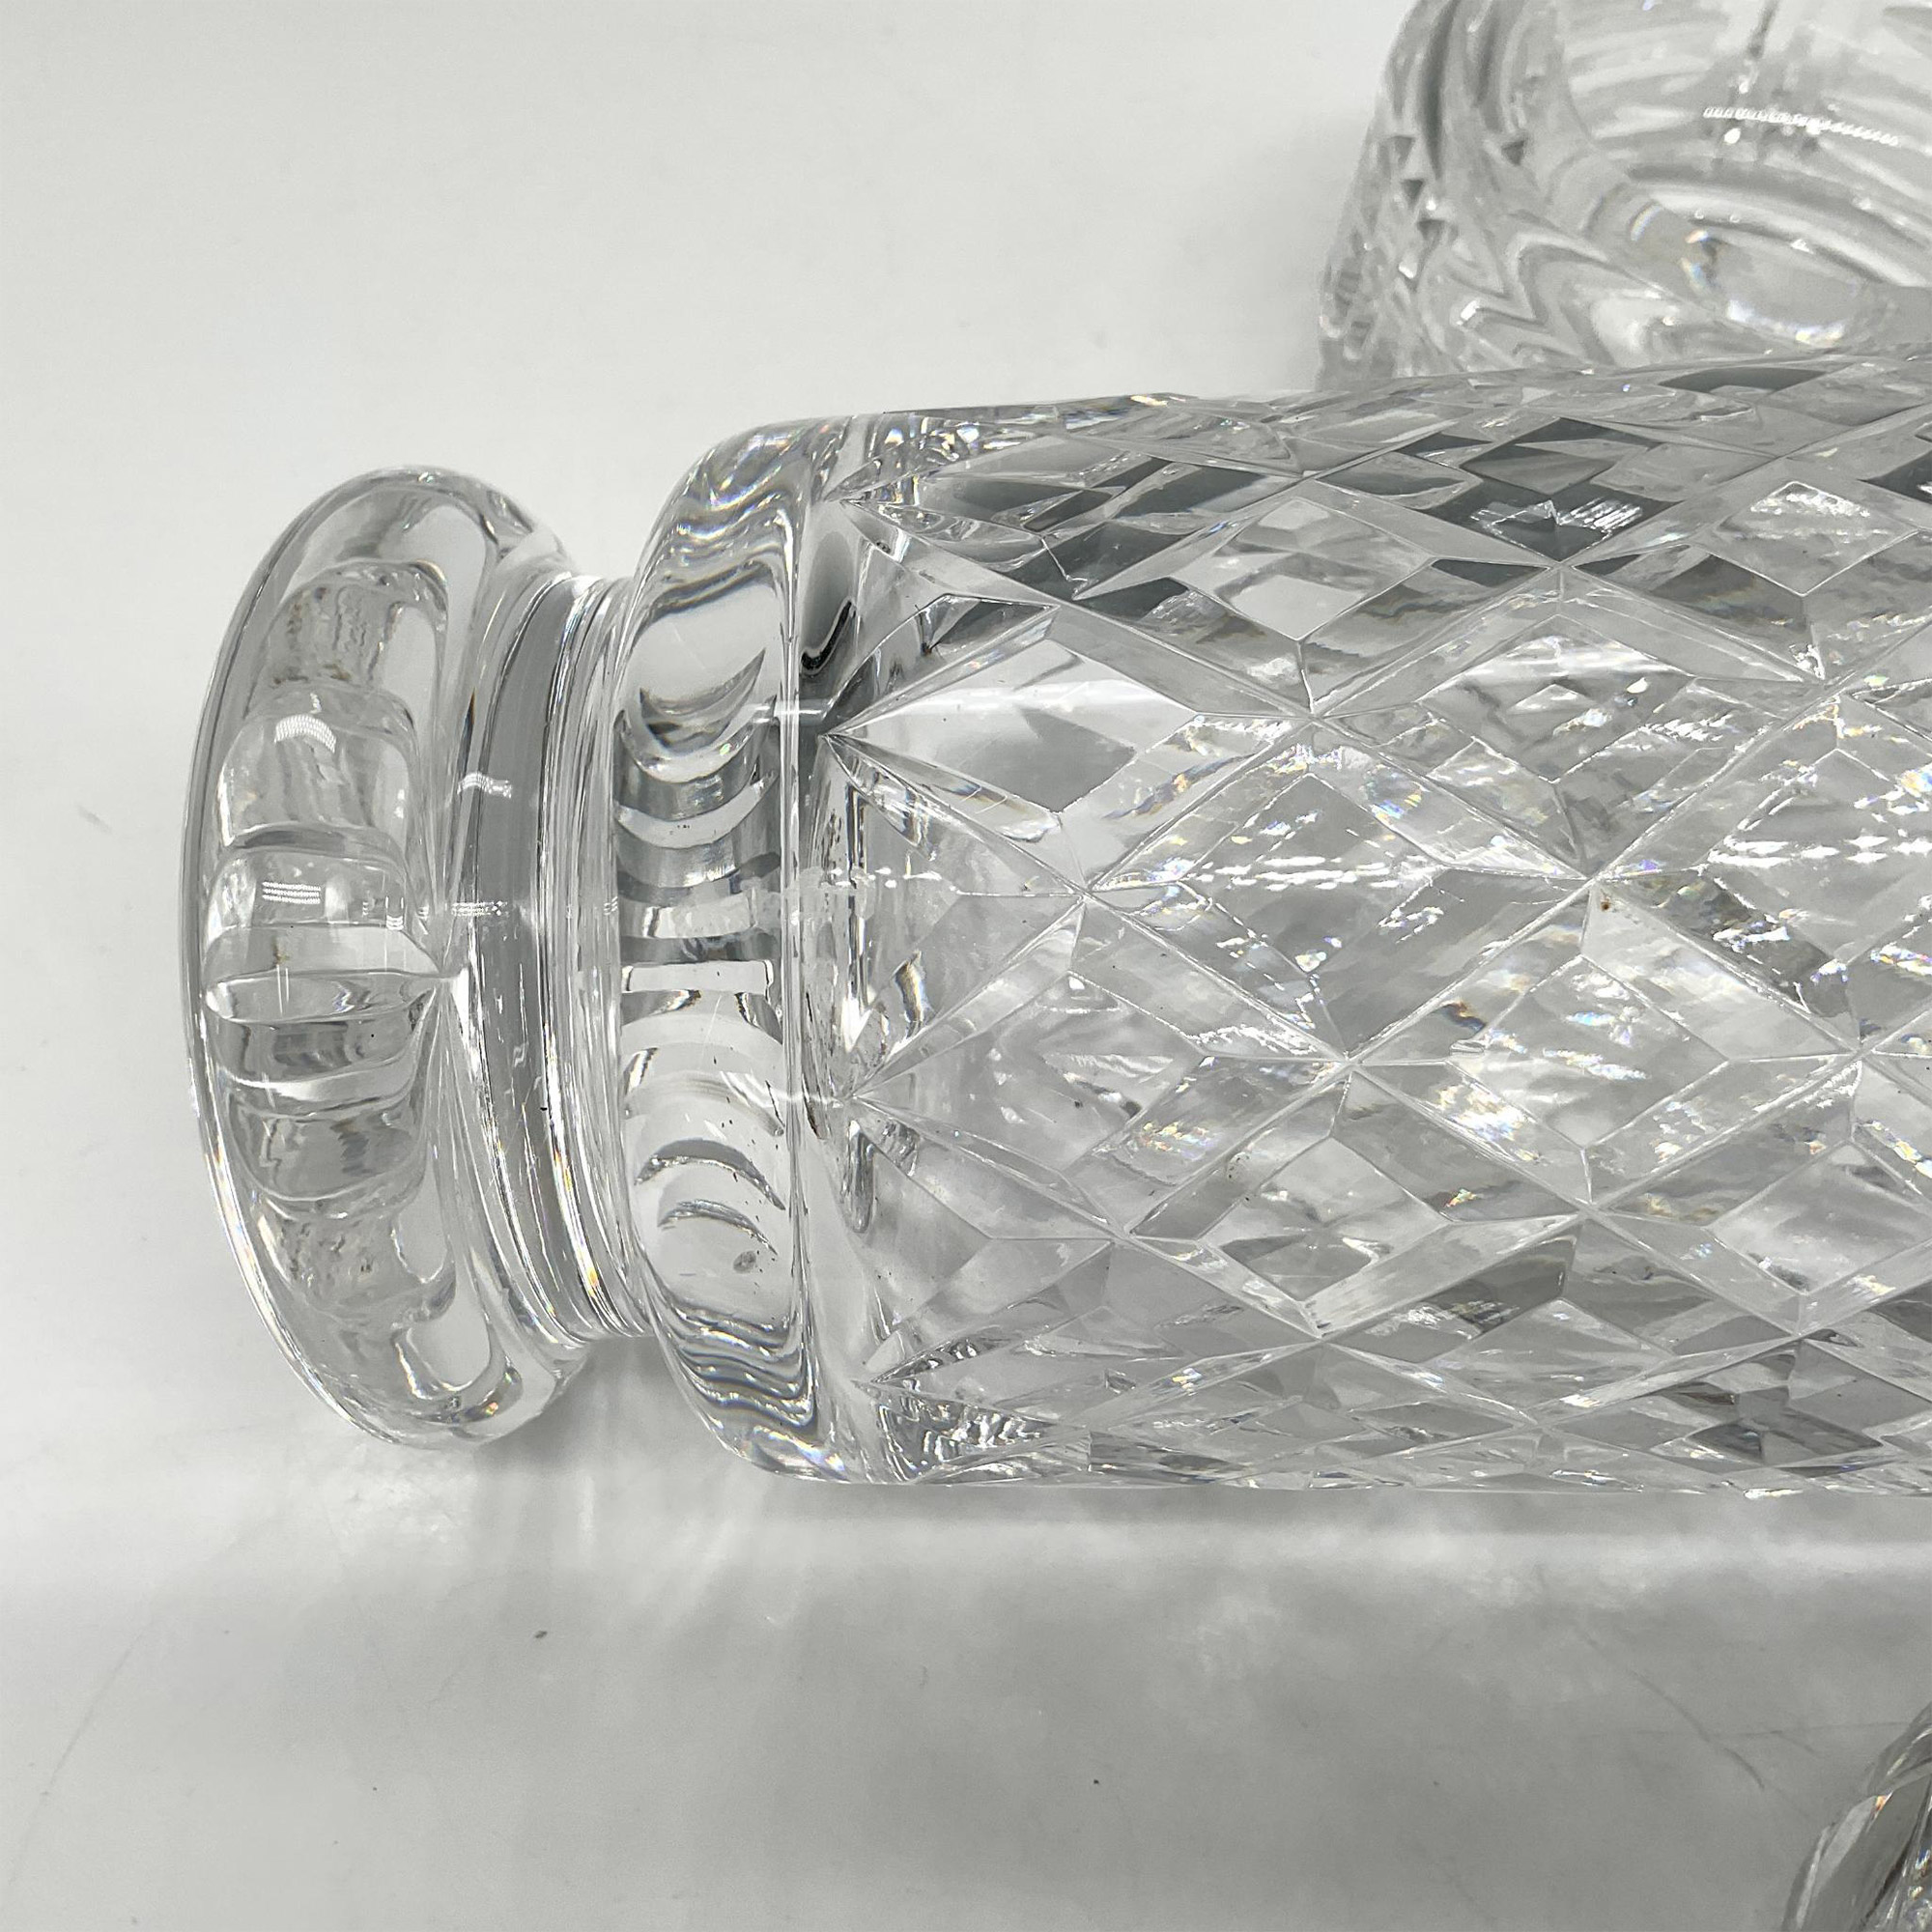 3pc Waterford Crystal Vase & Barrel Candle Holders - Image 3 of 3